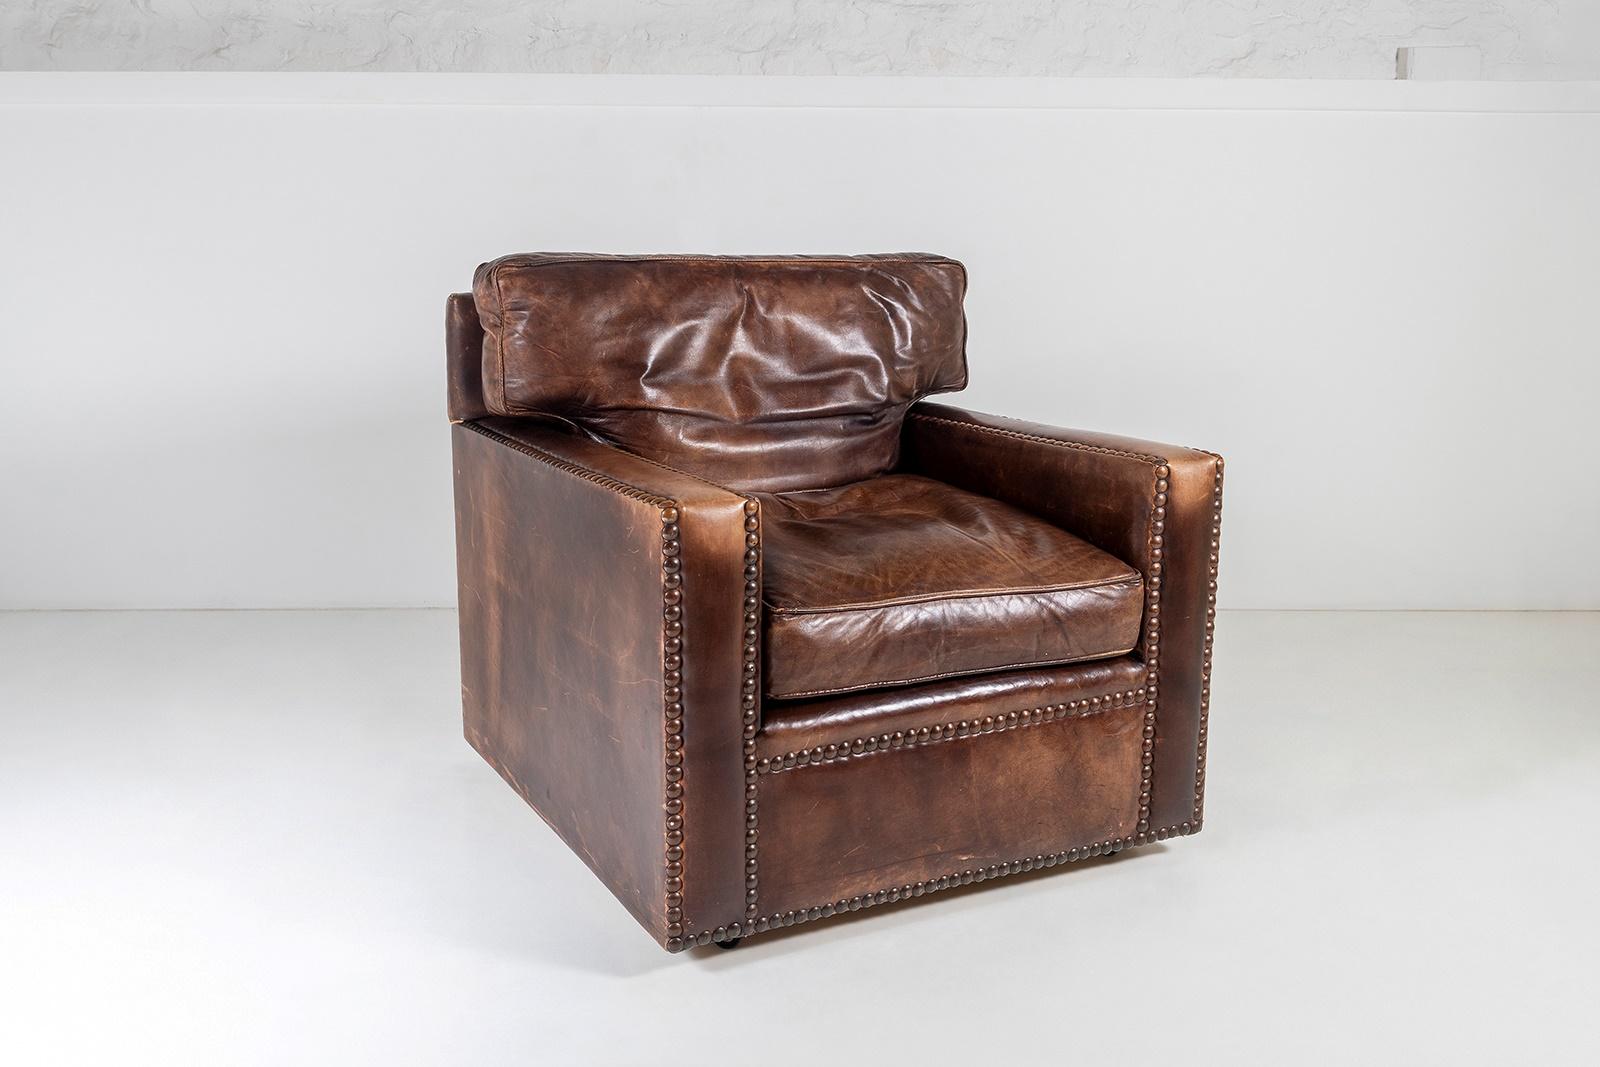 A superb, original handmade Chelsea Bordeaux vintage brown leather armchair in excellent condition.
This is a fine example of quality British craftsmanship, this example has a great look in original untouched condition, the leather patina is superb,